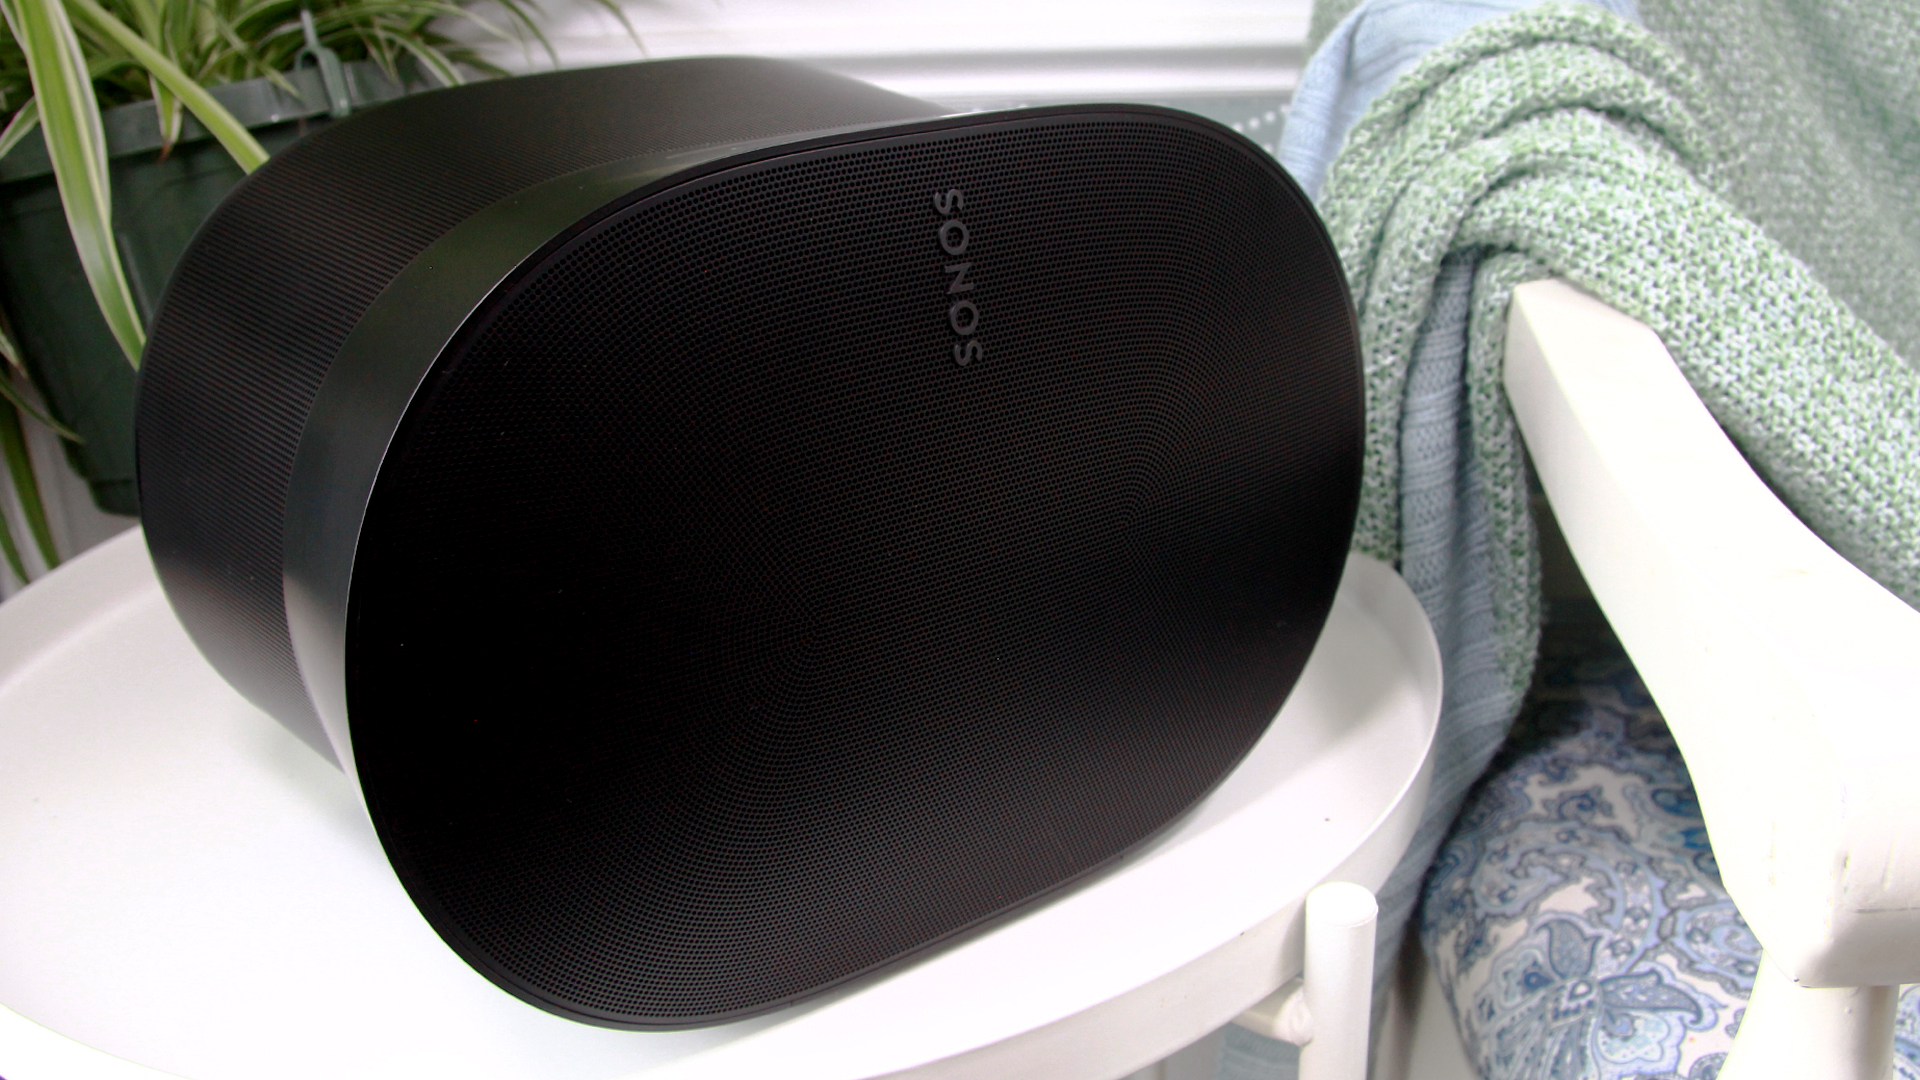 Era 300: The Spatial Audio Speaker With Dolby Atmos